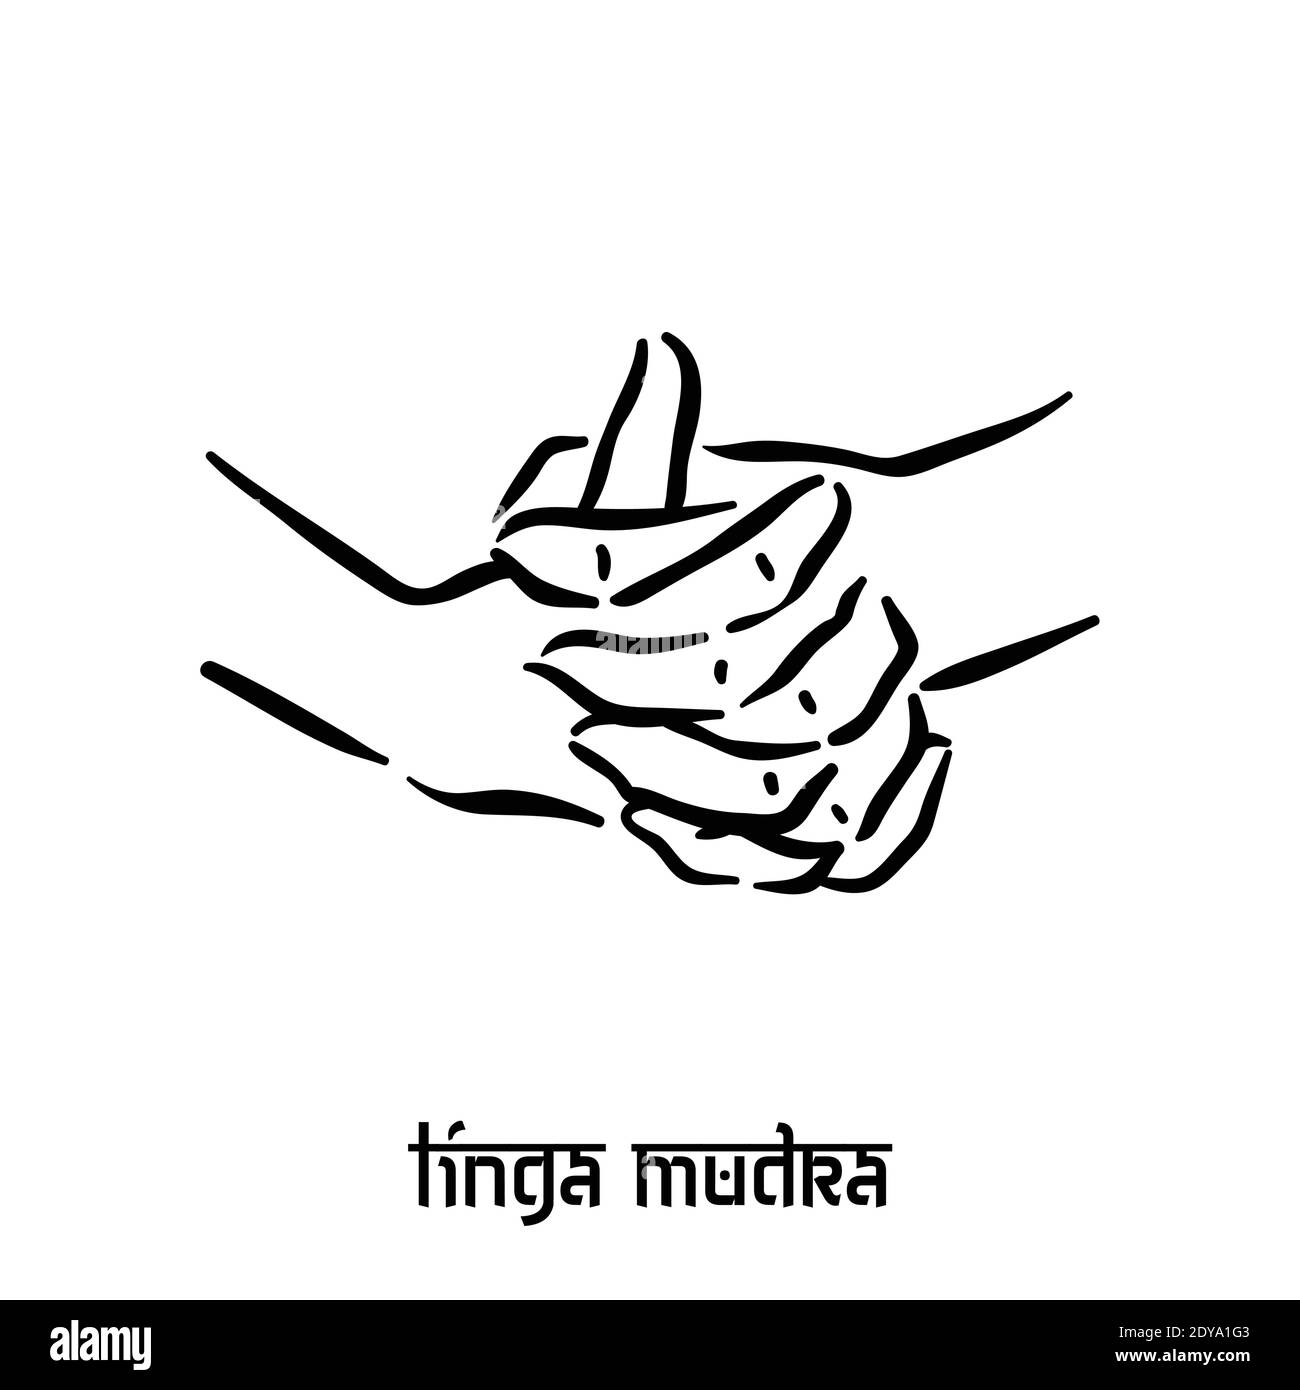 Linga mudra is a hand gesture that increases the temperature in the body by  balancing the fire element in the body. It concentrates on generating  warmth in the body. Linga mudra is